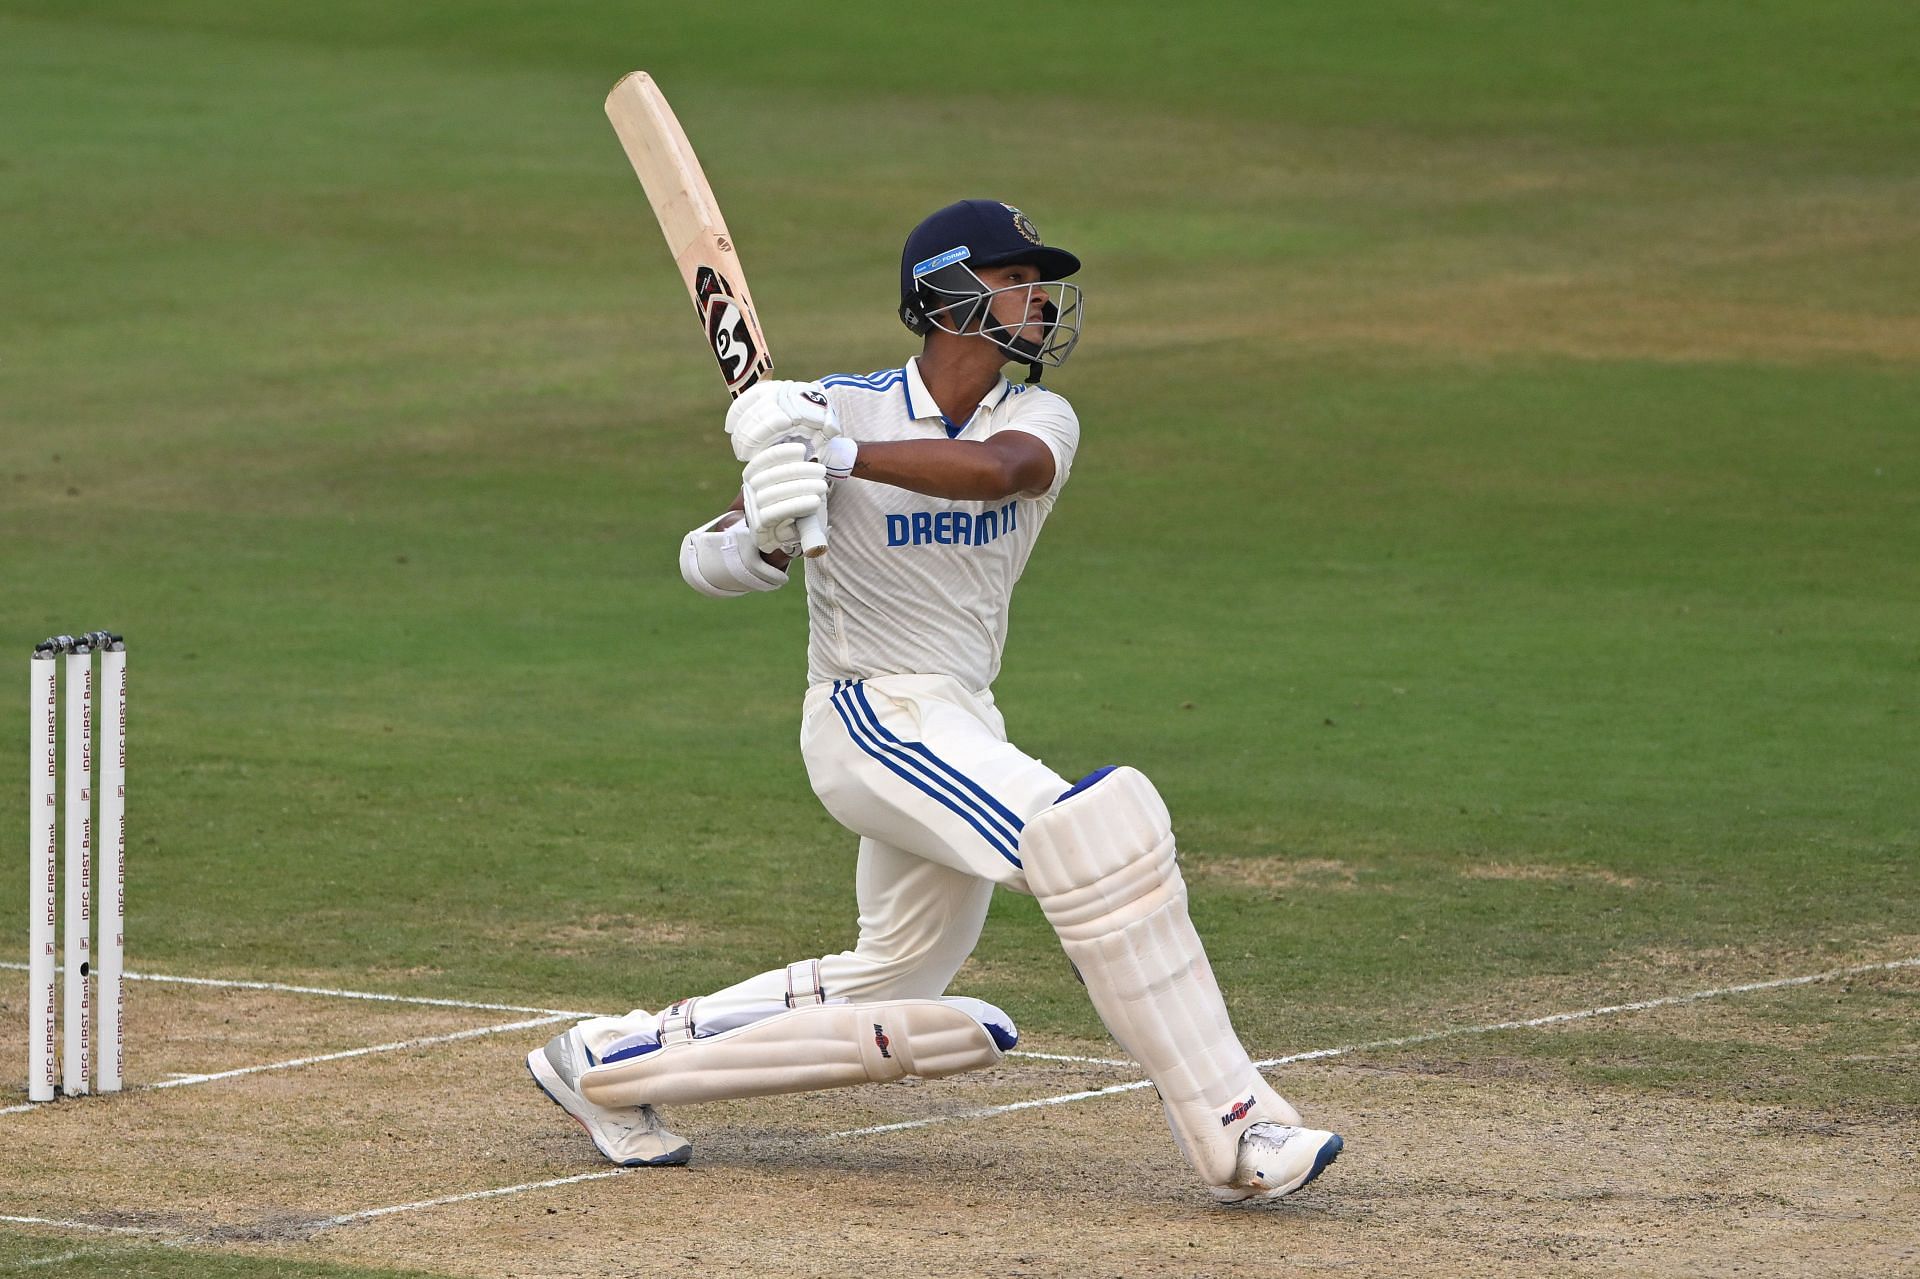 Yashasvi Jaiswal has struck 17 fours and five sixes during his innings. [P/C: Getty]